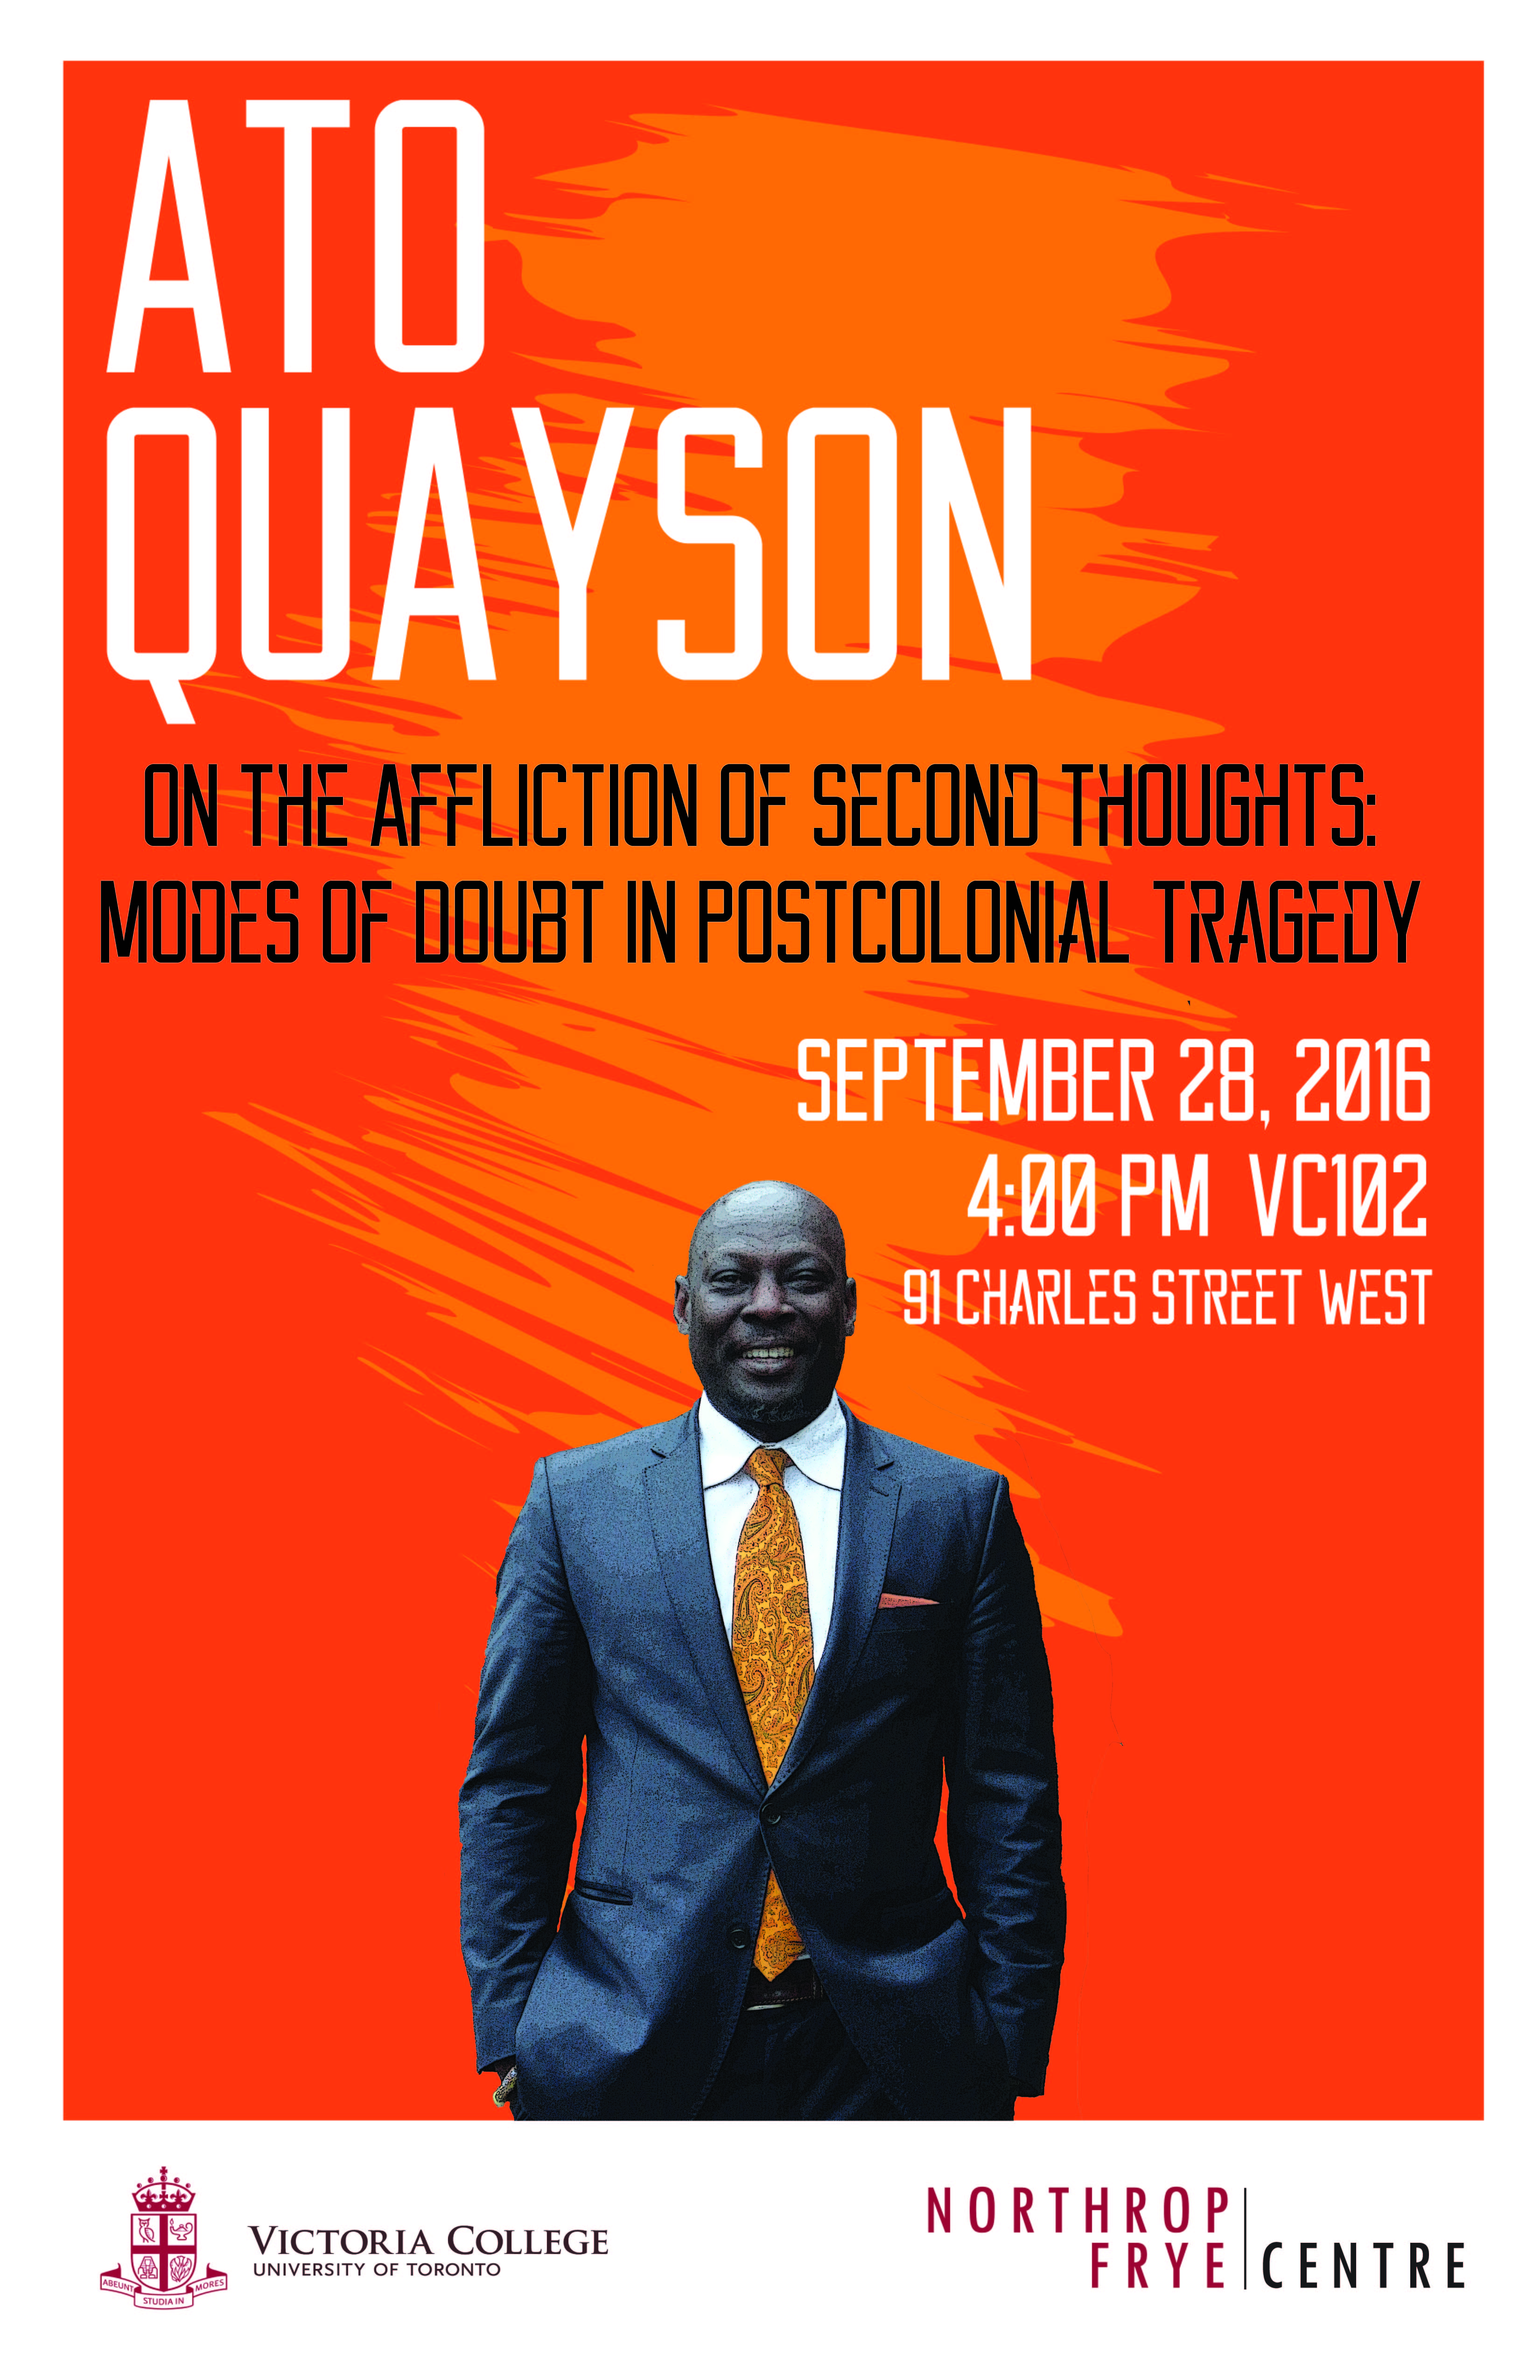 Sep. 28, 2016 | On the Afflictions of Second Thoughts | Ato Quayson